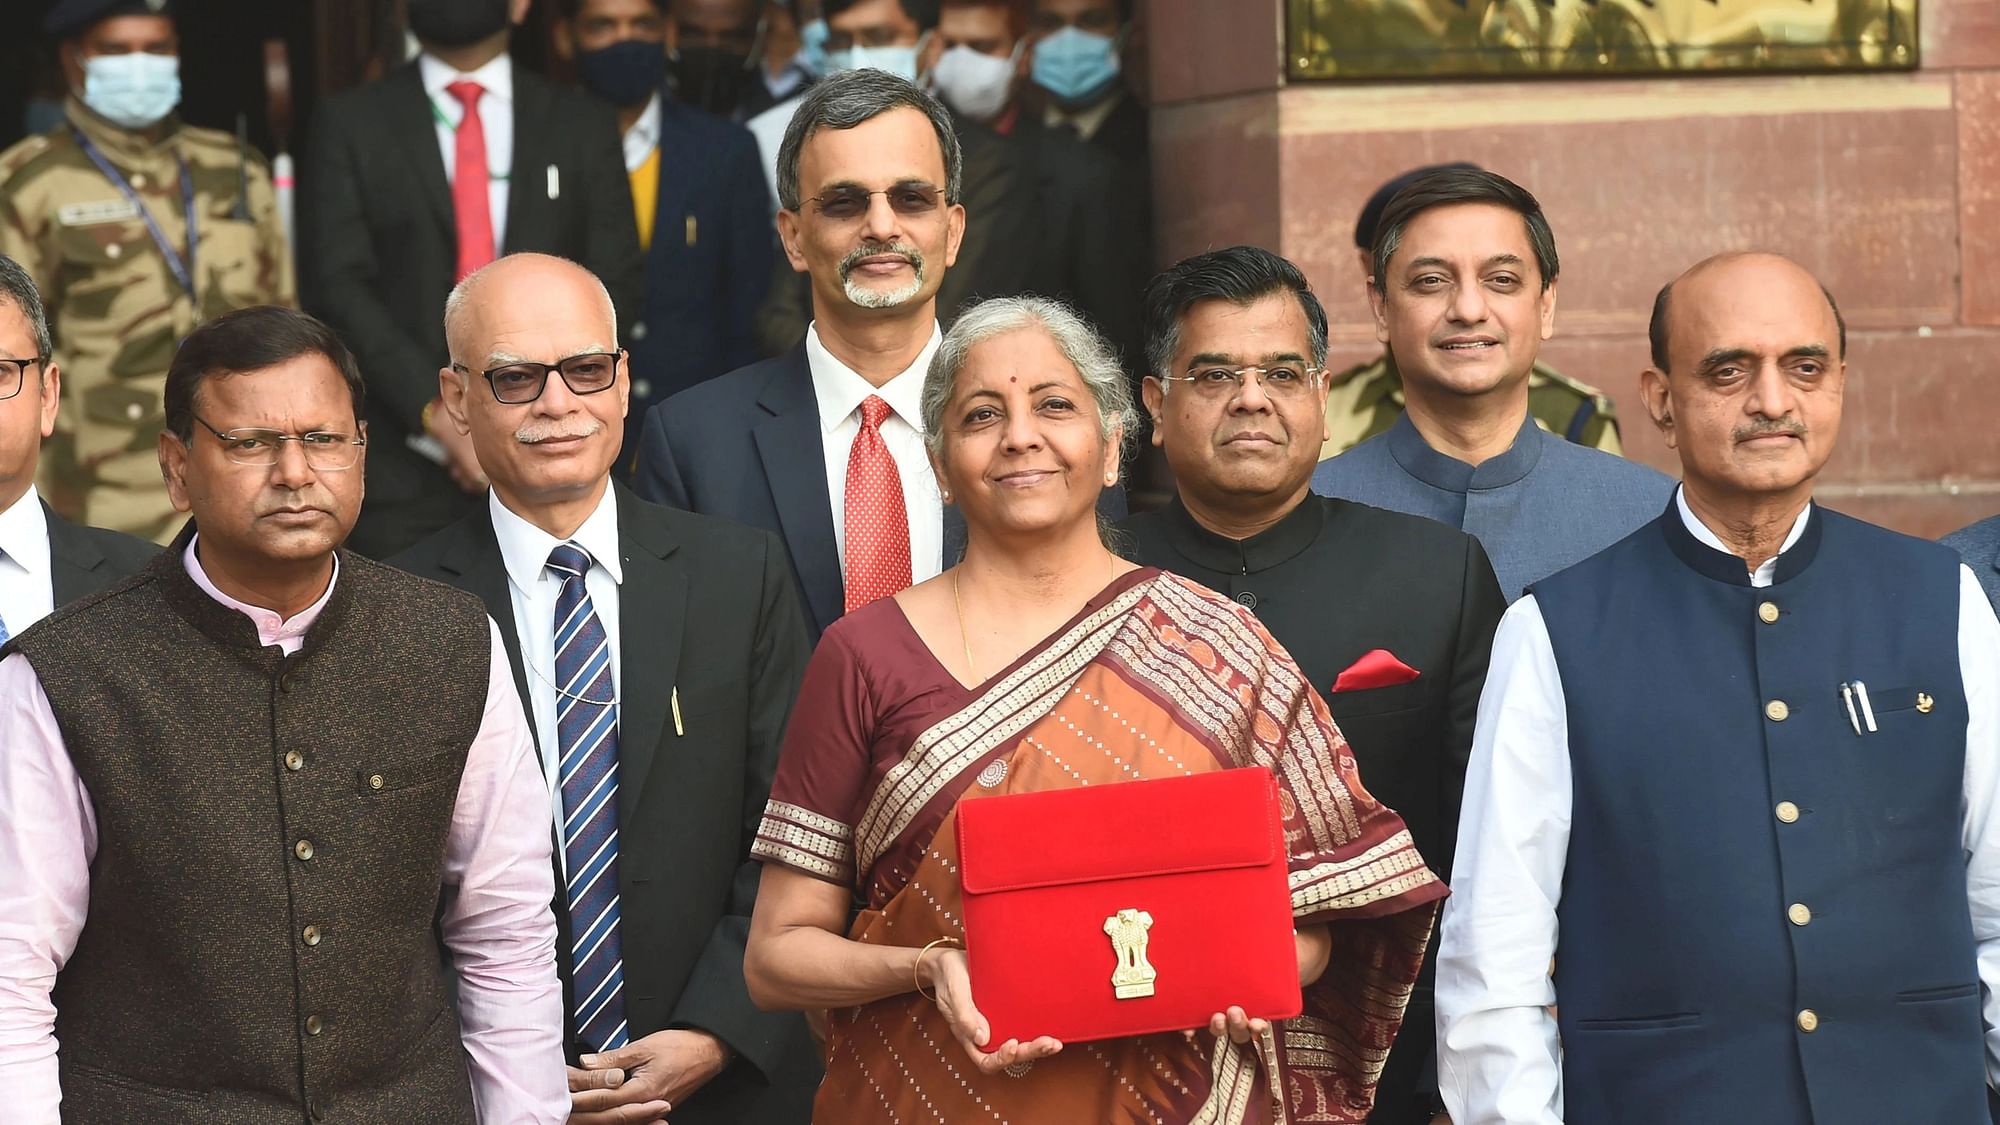 <div class="paragraphs"><p>New Delhi: Union Finance Minister Nirmala Sitharaman holds a folder-case containing the Union Budget 2022-23 as she poses for a group photograph with MoS Finance Pankaj Chaudhary and officials of the Finance Ministry, at North Block in New Delhi, Tuesday, 1 February. Sitharaman presented her fourth Union Budget in the Parliament on this day.</p></div>